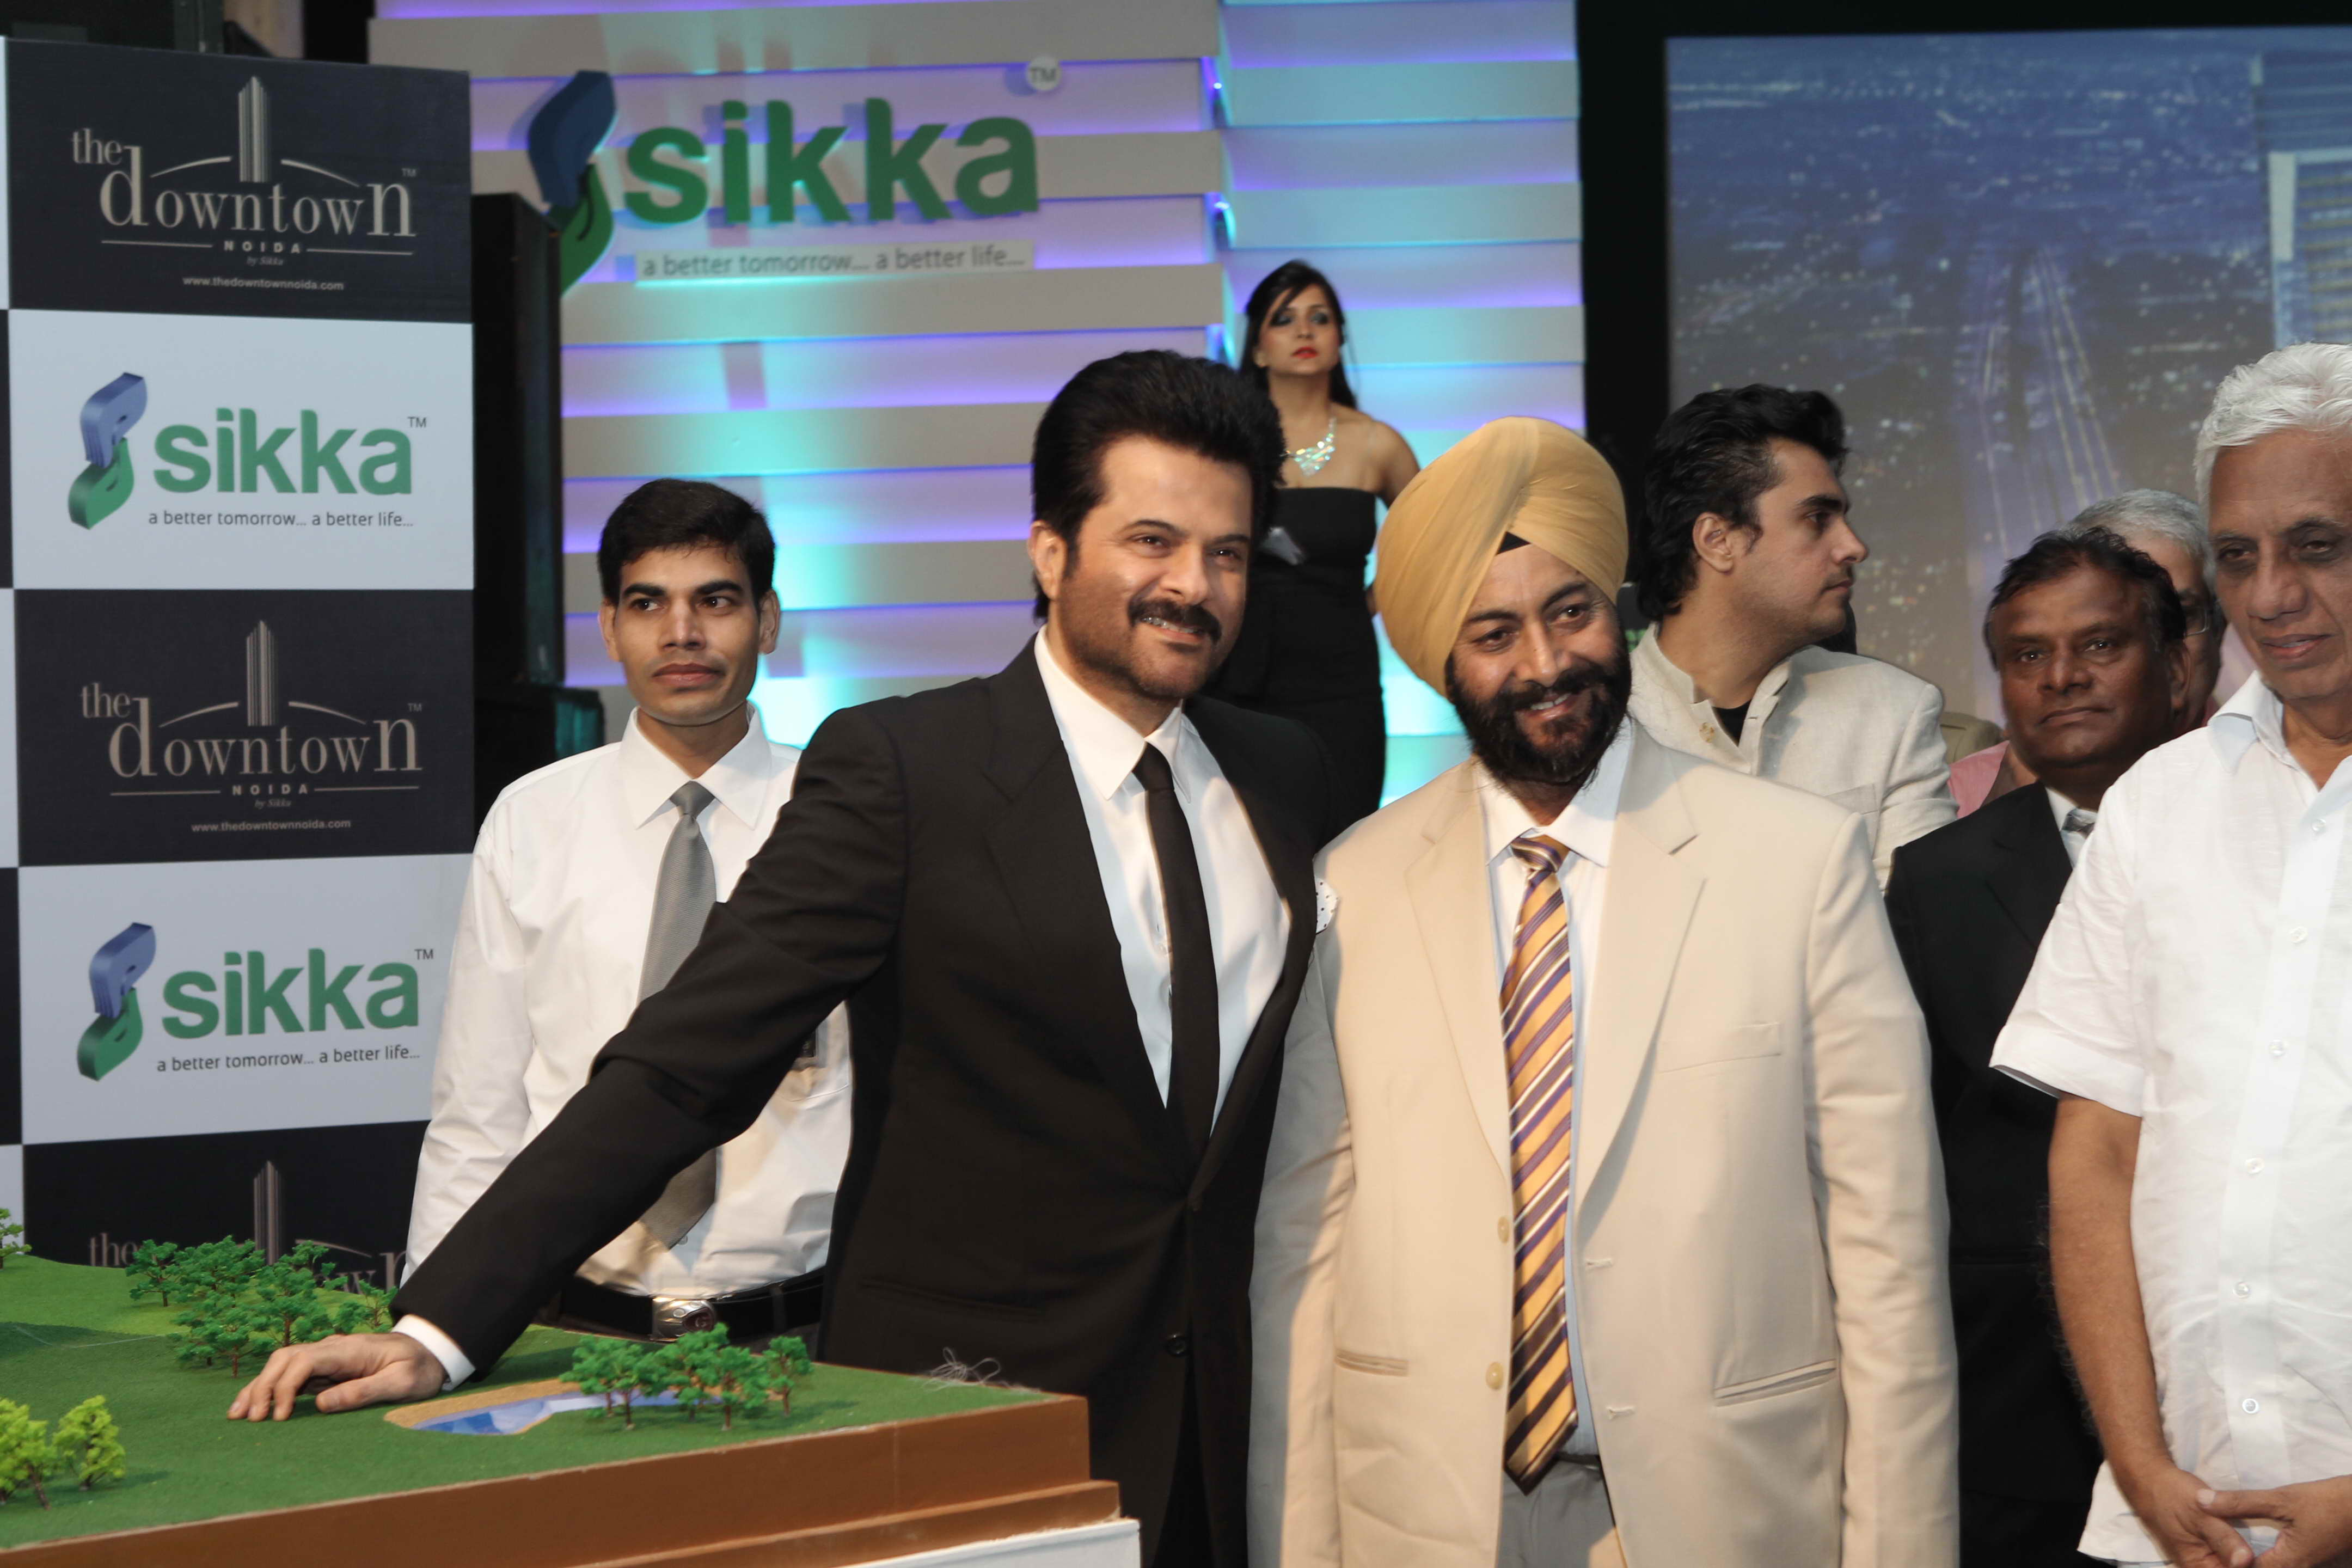 Sikka Downtown Launch, India real estate news, Indian realty news, Property new, Home, Policy Advocacy, Activism, Mall, Retail, Office space, SEZ, IT/ITeS, Residential, Commercial, Hospitality, Project, Location, Regulation, FDI, Taxation, Investment, Banking, Property Management, Ravi Sinha, Track2Media, Track2Realty